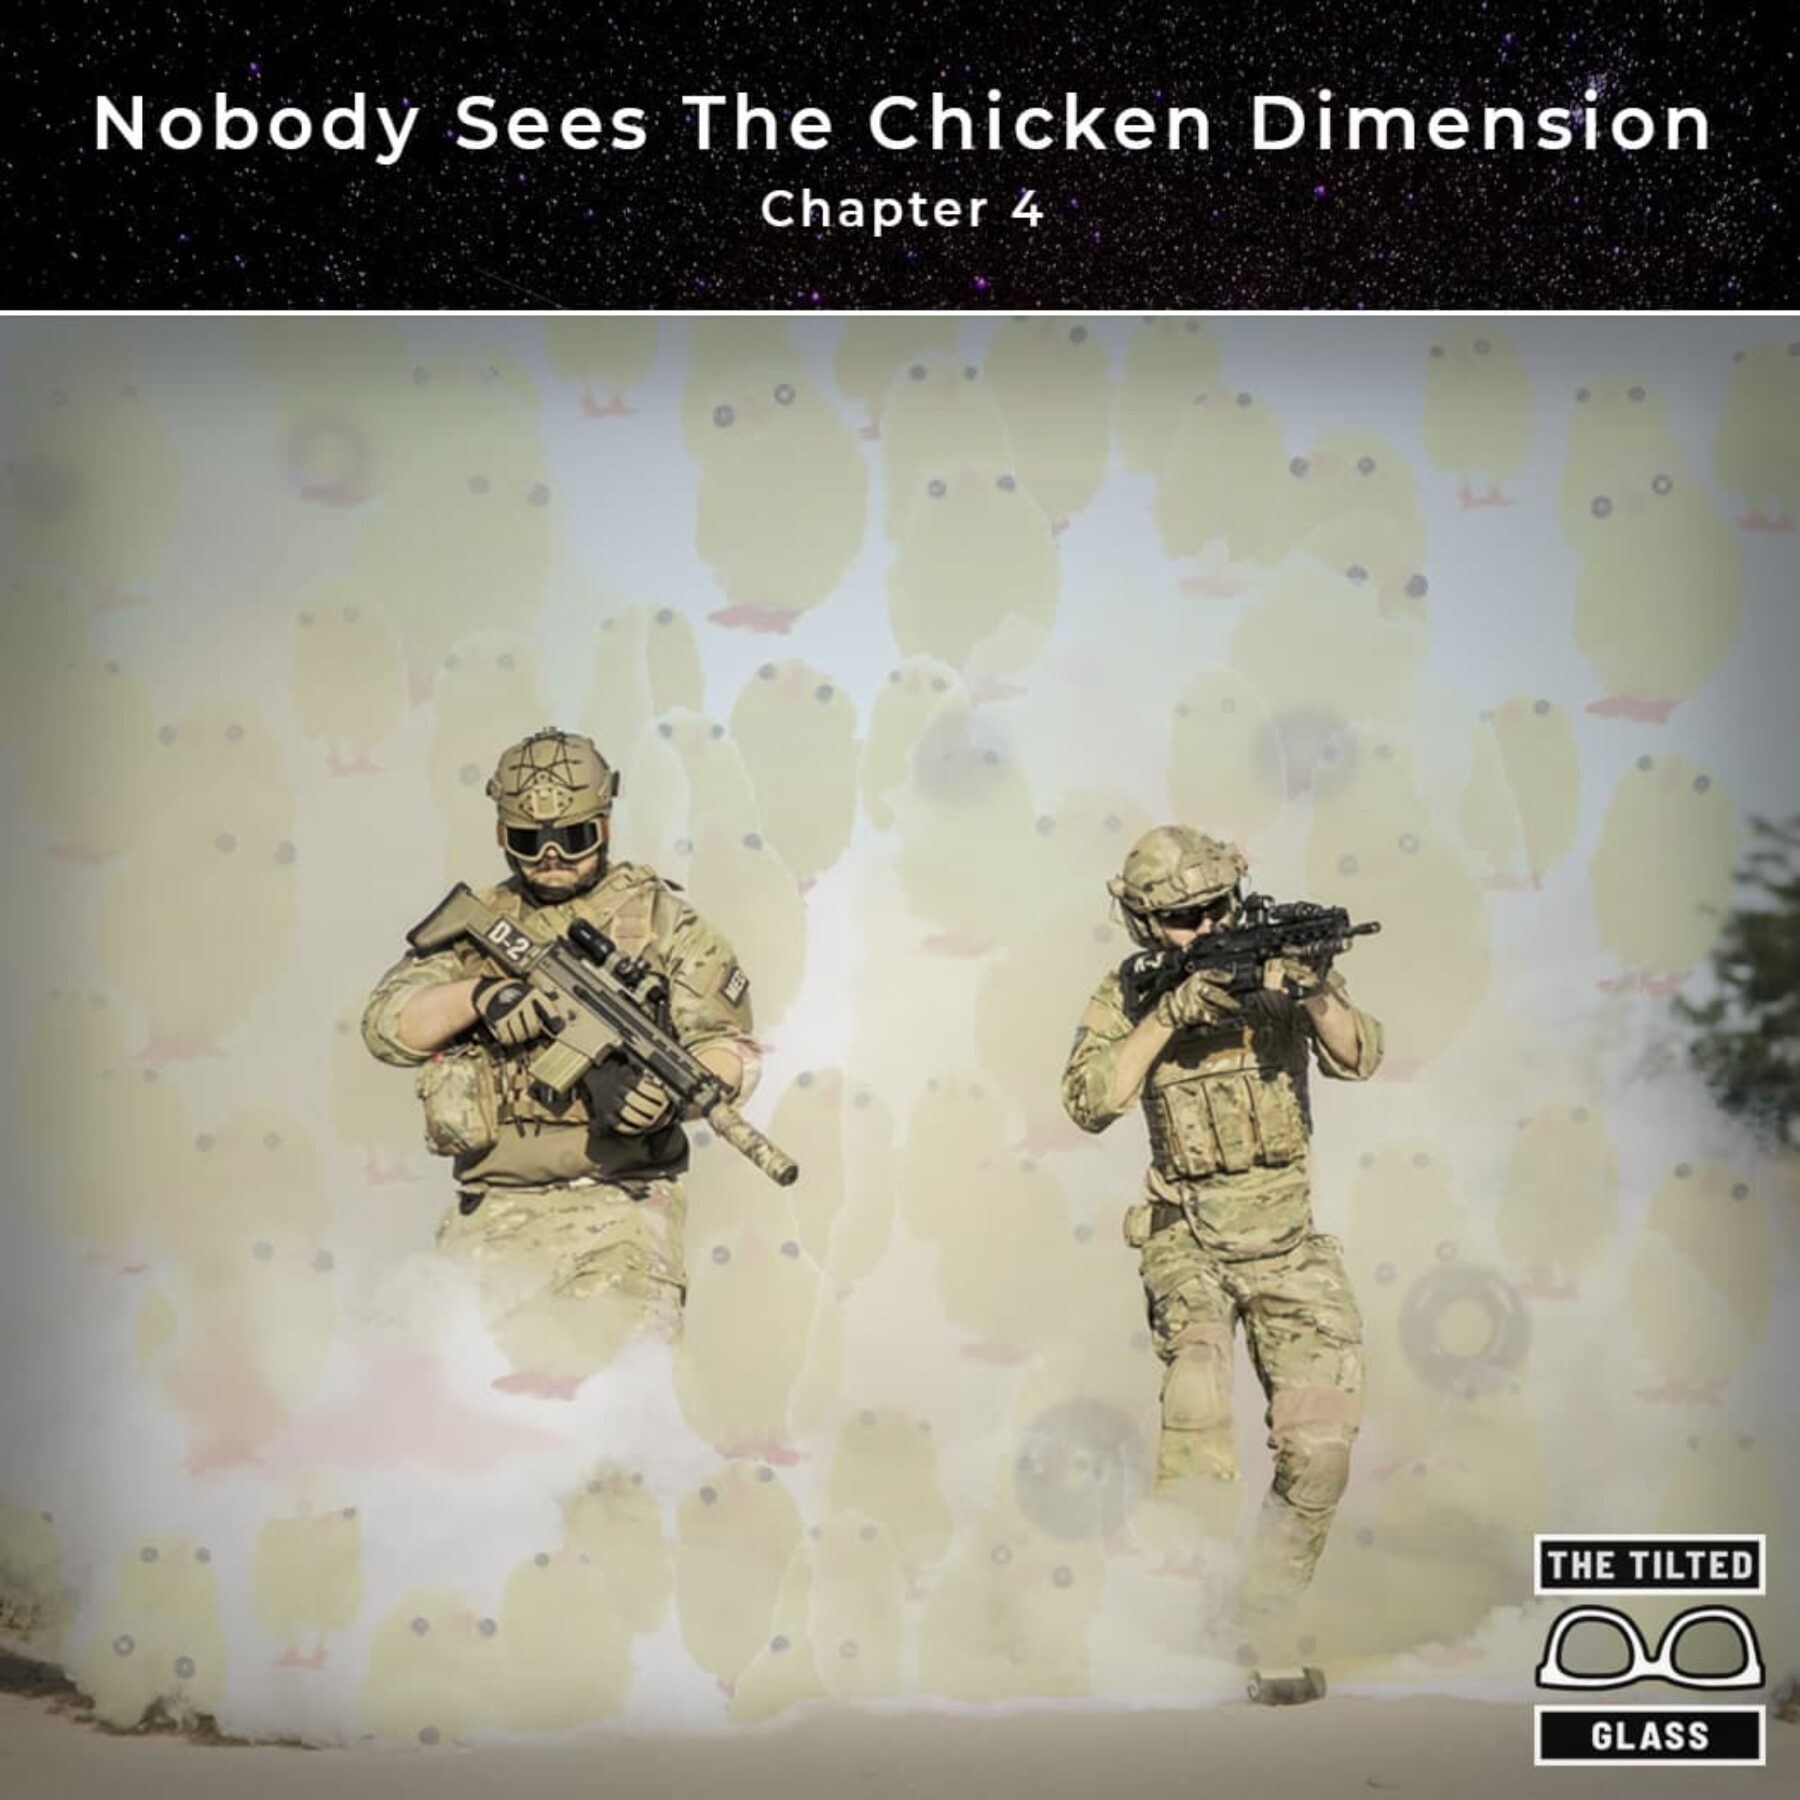 Nobody Sees The Chicken Dimension - Chapter 4 - Theatre of War